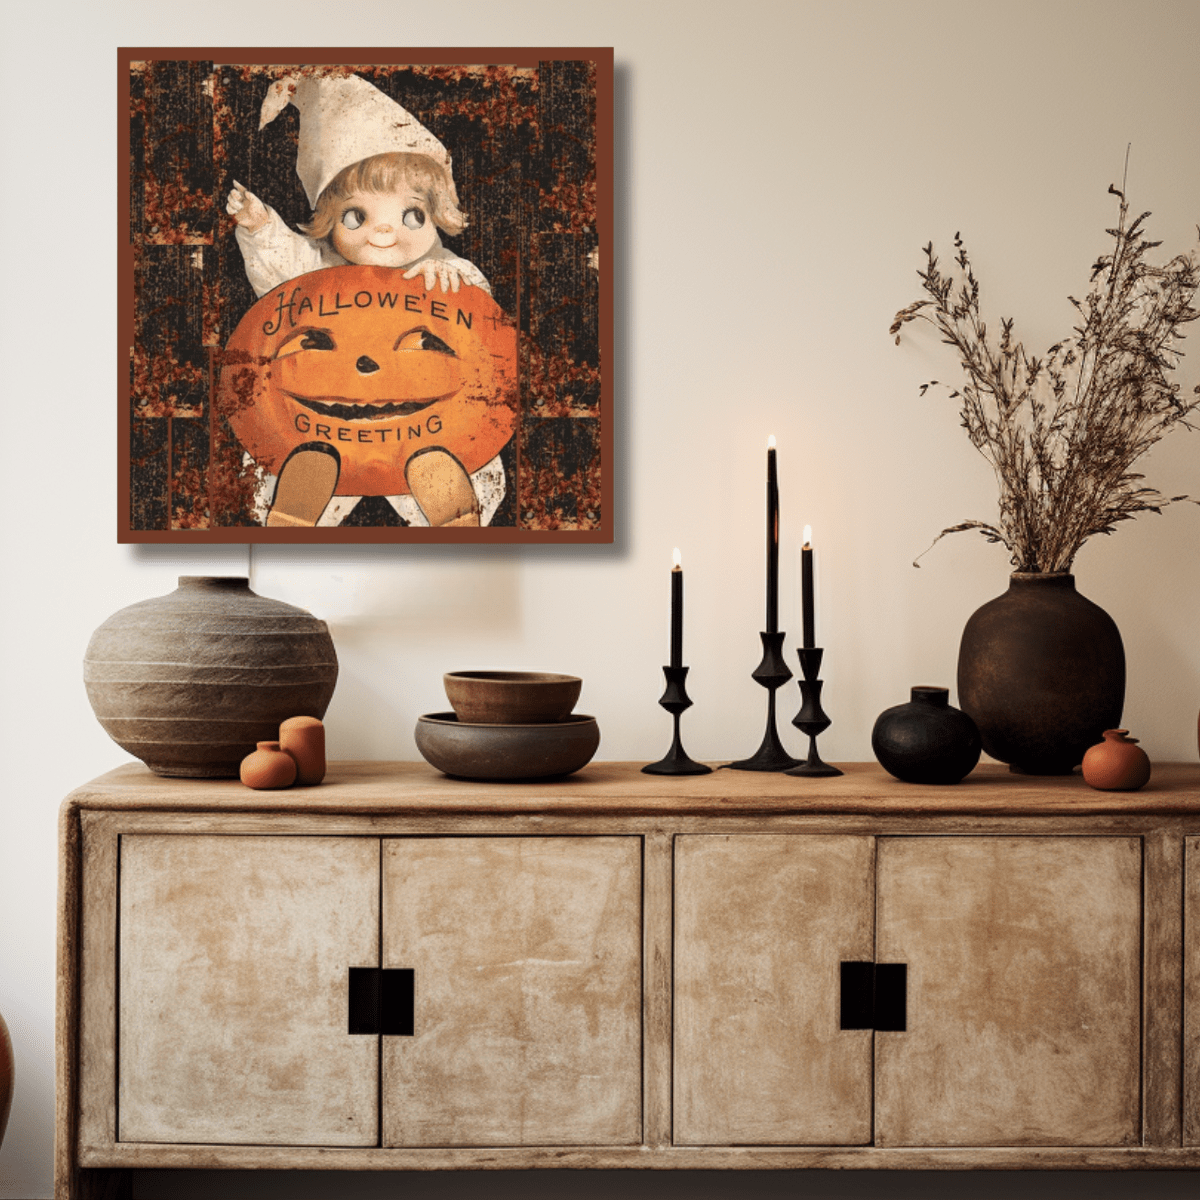 Samhain Halloween Indoor Decor Samhain Art Witchy Decor Aesthetic Wiccan Housewarming Gift Witchcraft Sign Vintage Fall Wall Art